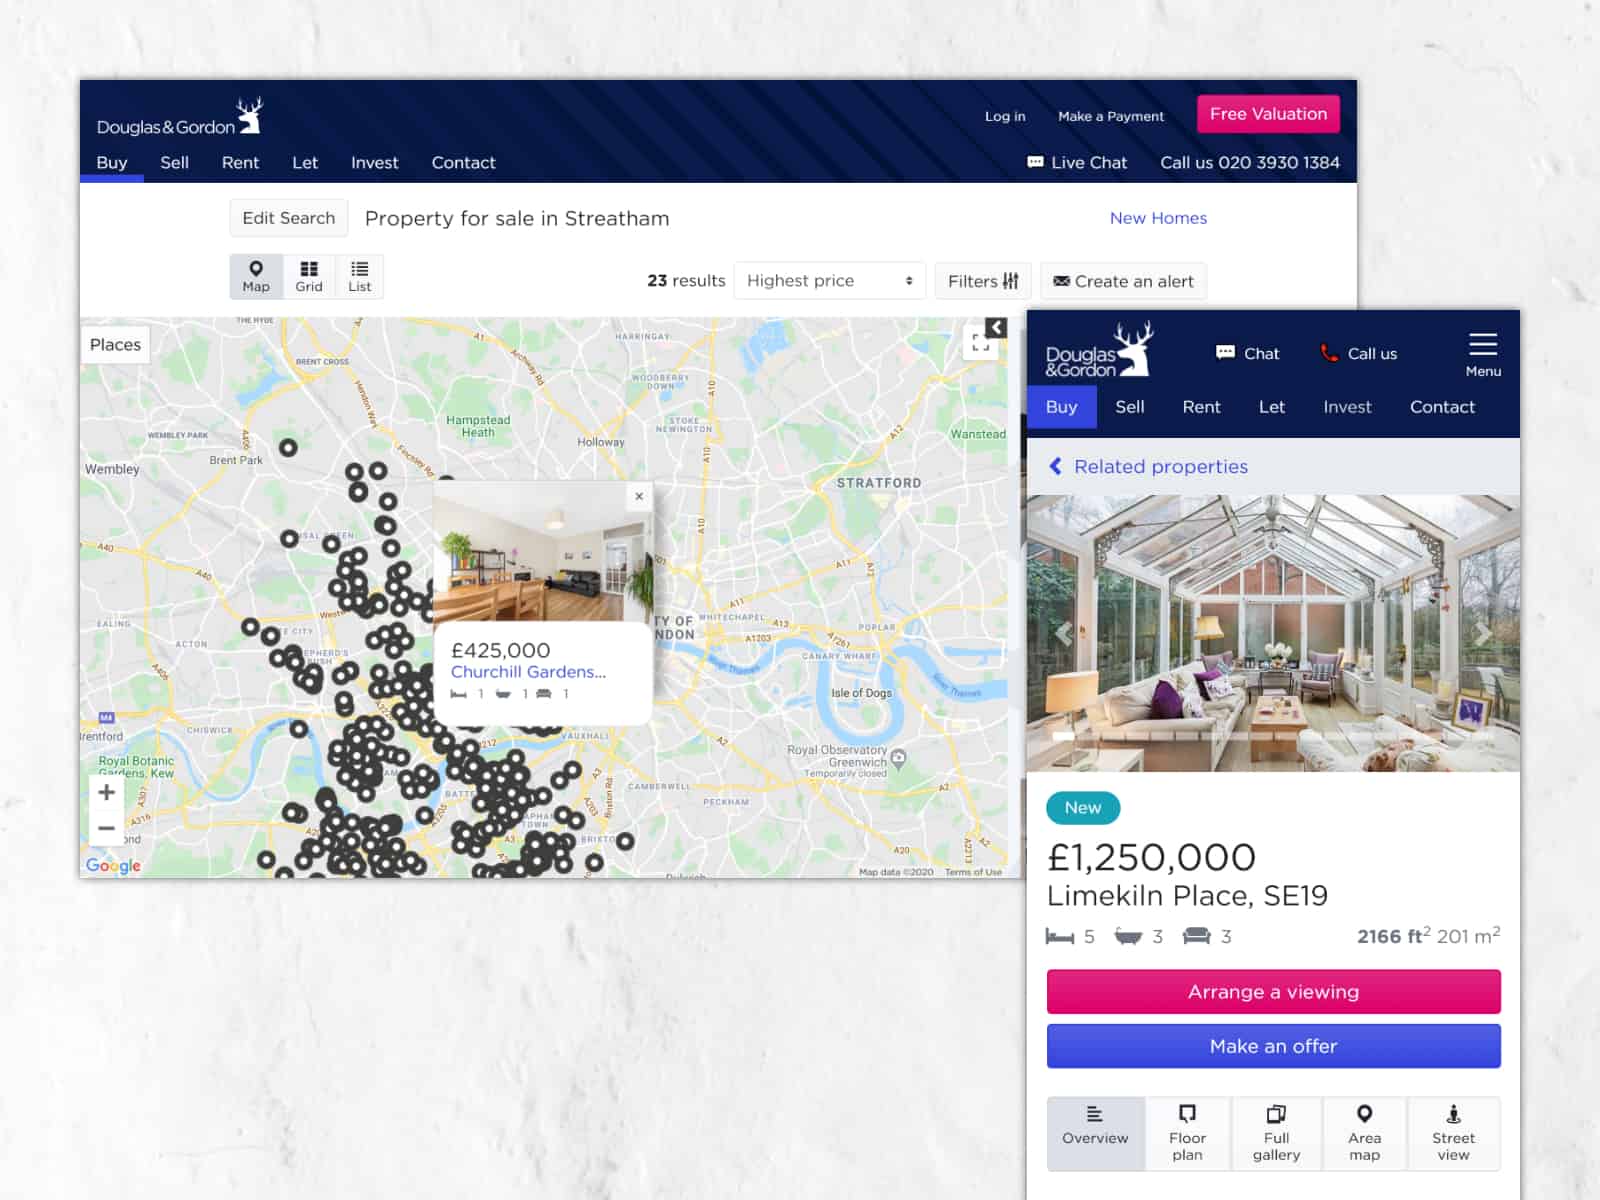 Screenshot of the search map view and property details